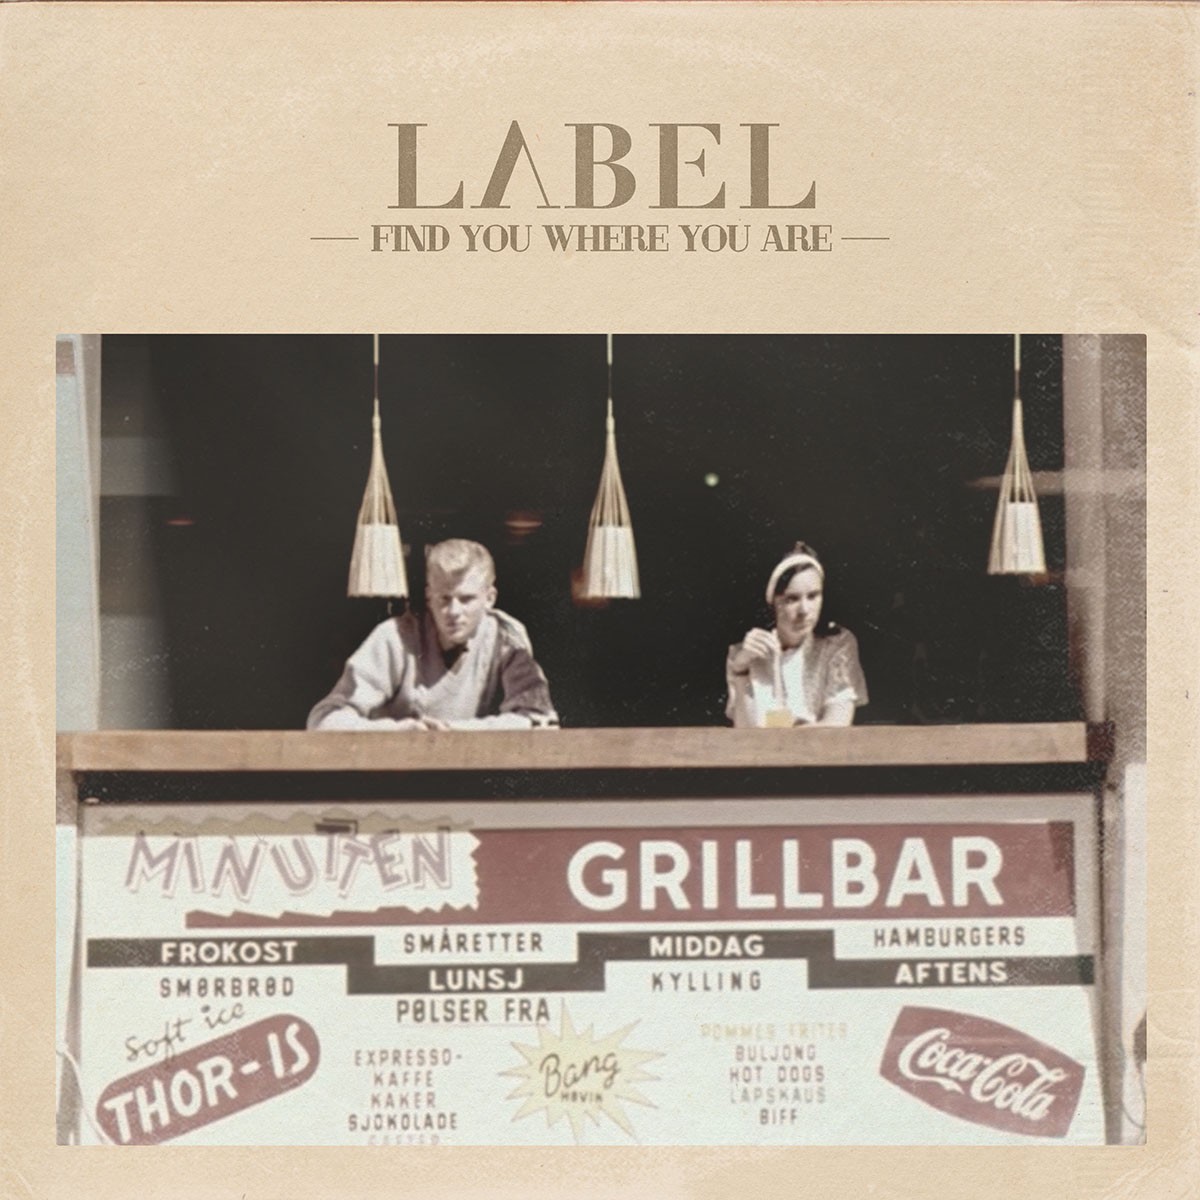 “Find You Where You Are”, Label band’ new summer single out today via Mother Likes It Records